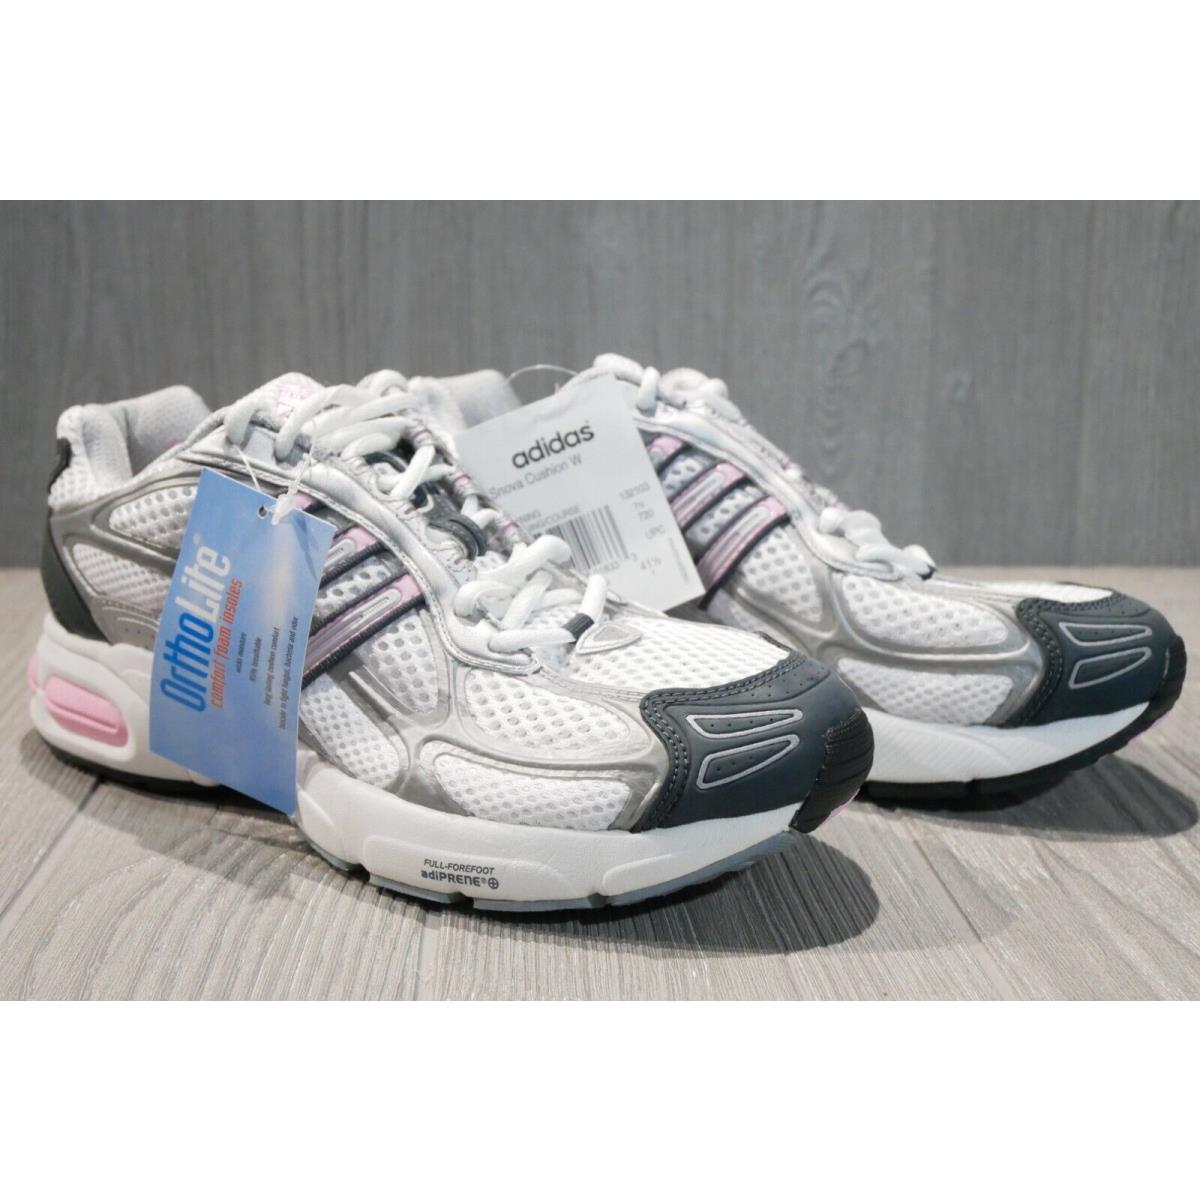 Adidas shoes  - Pink 1